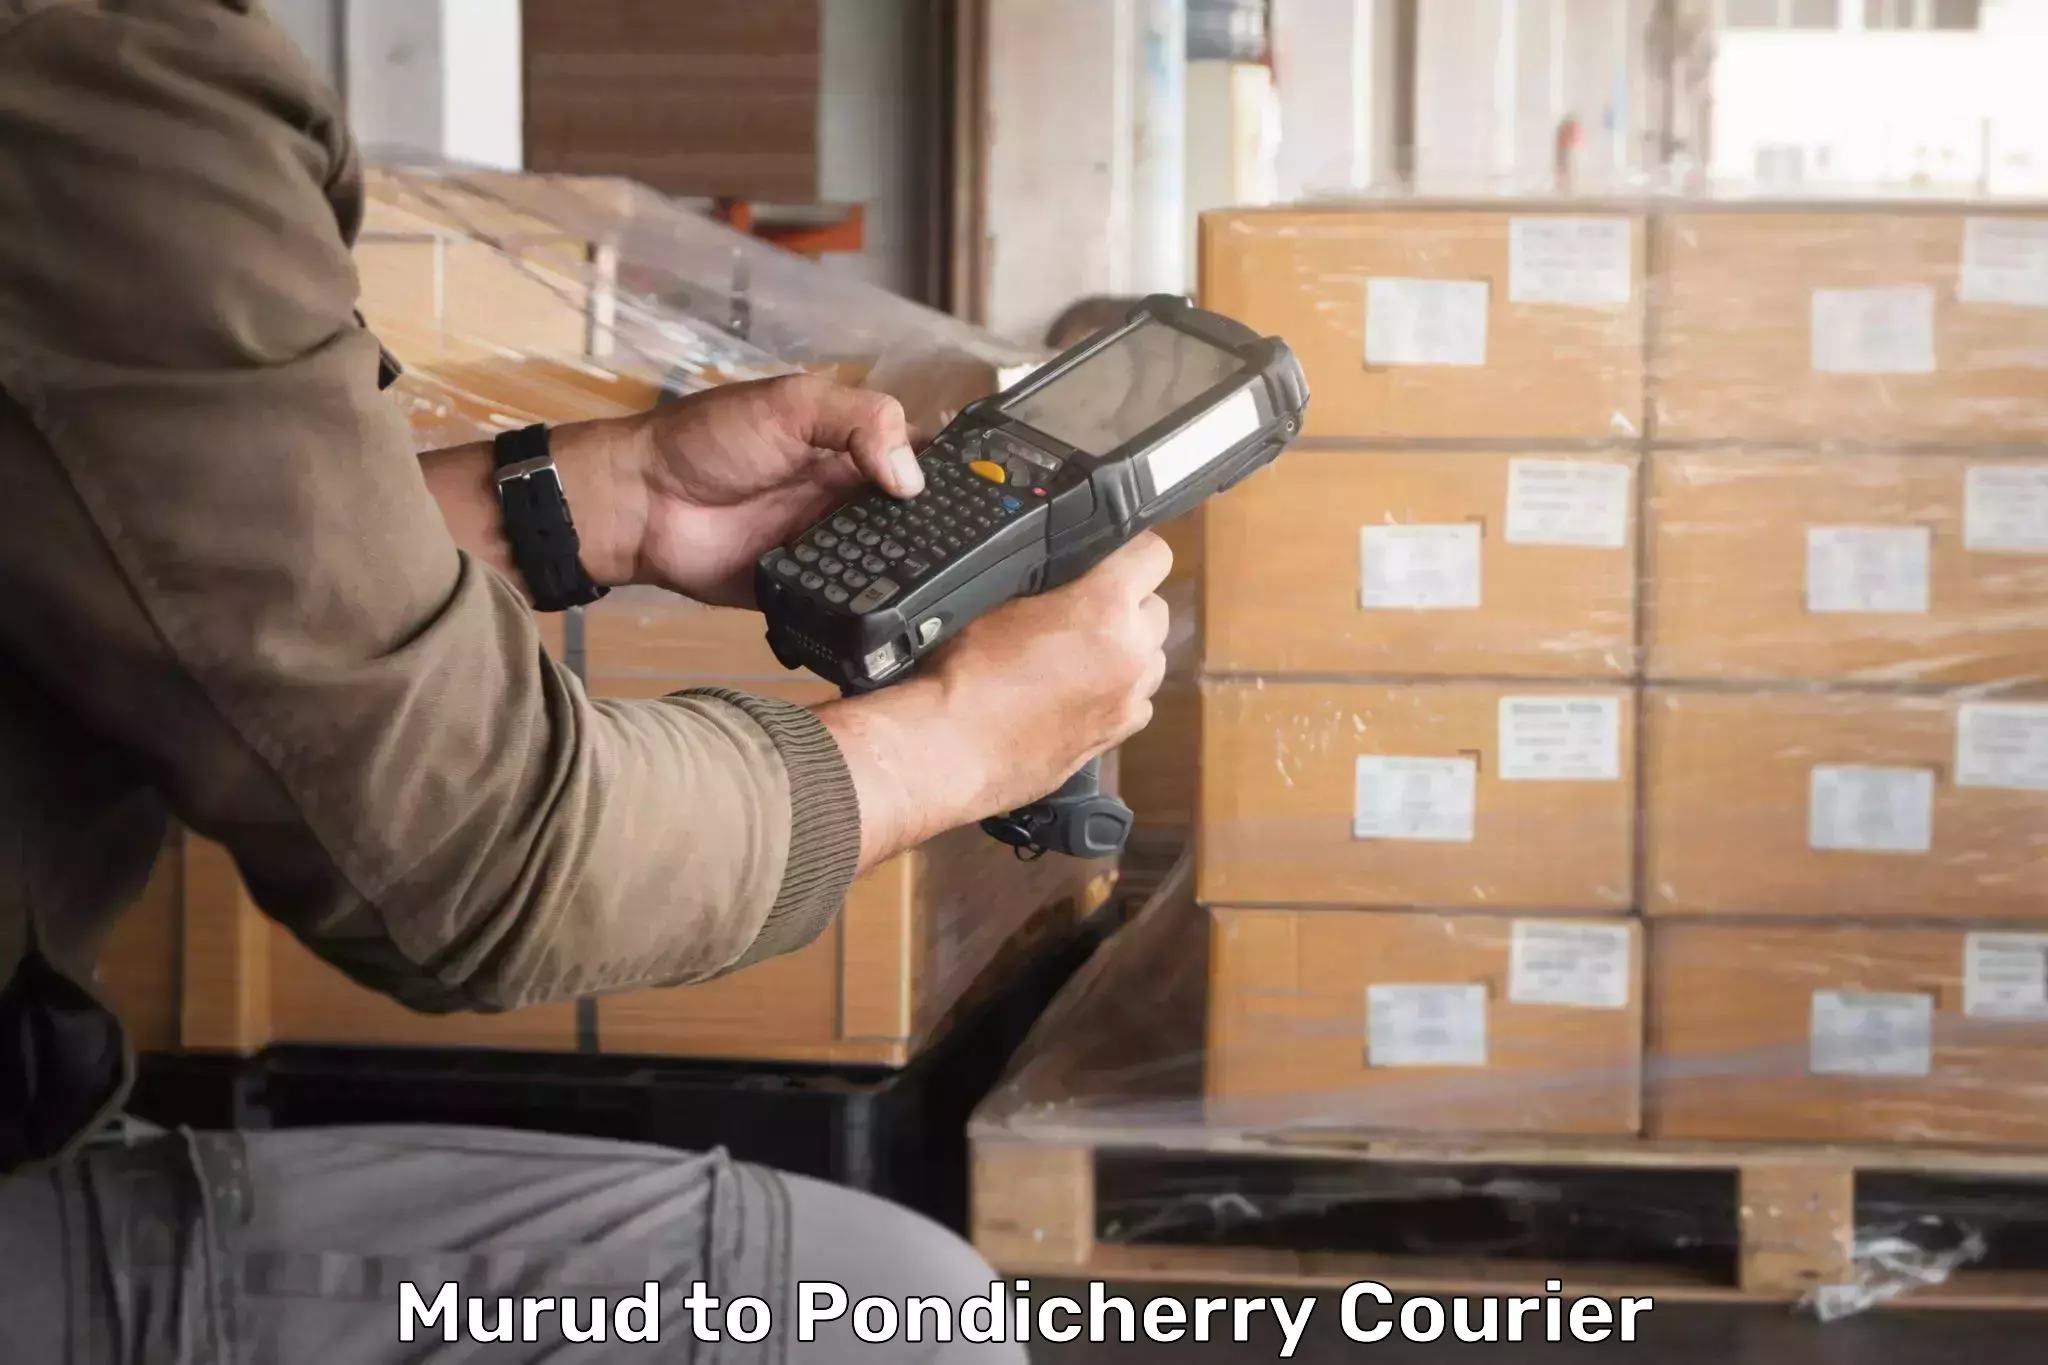 Global courier networks Murud to Pondicherry